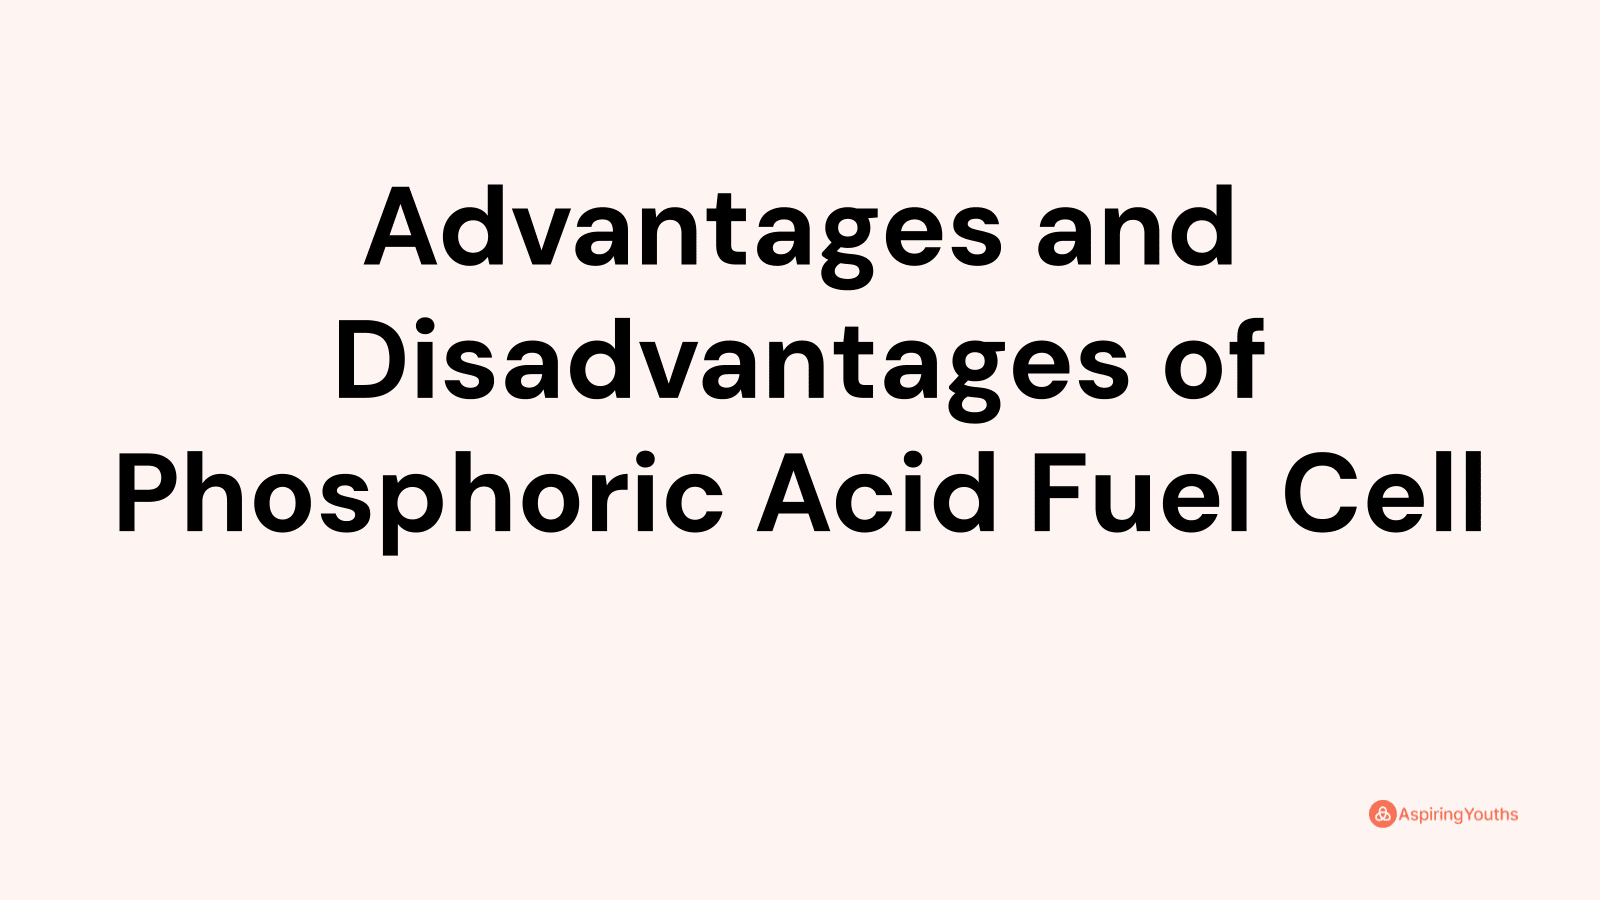 Advantages and disadvantages of Phosphoric Acid Fuel Cell